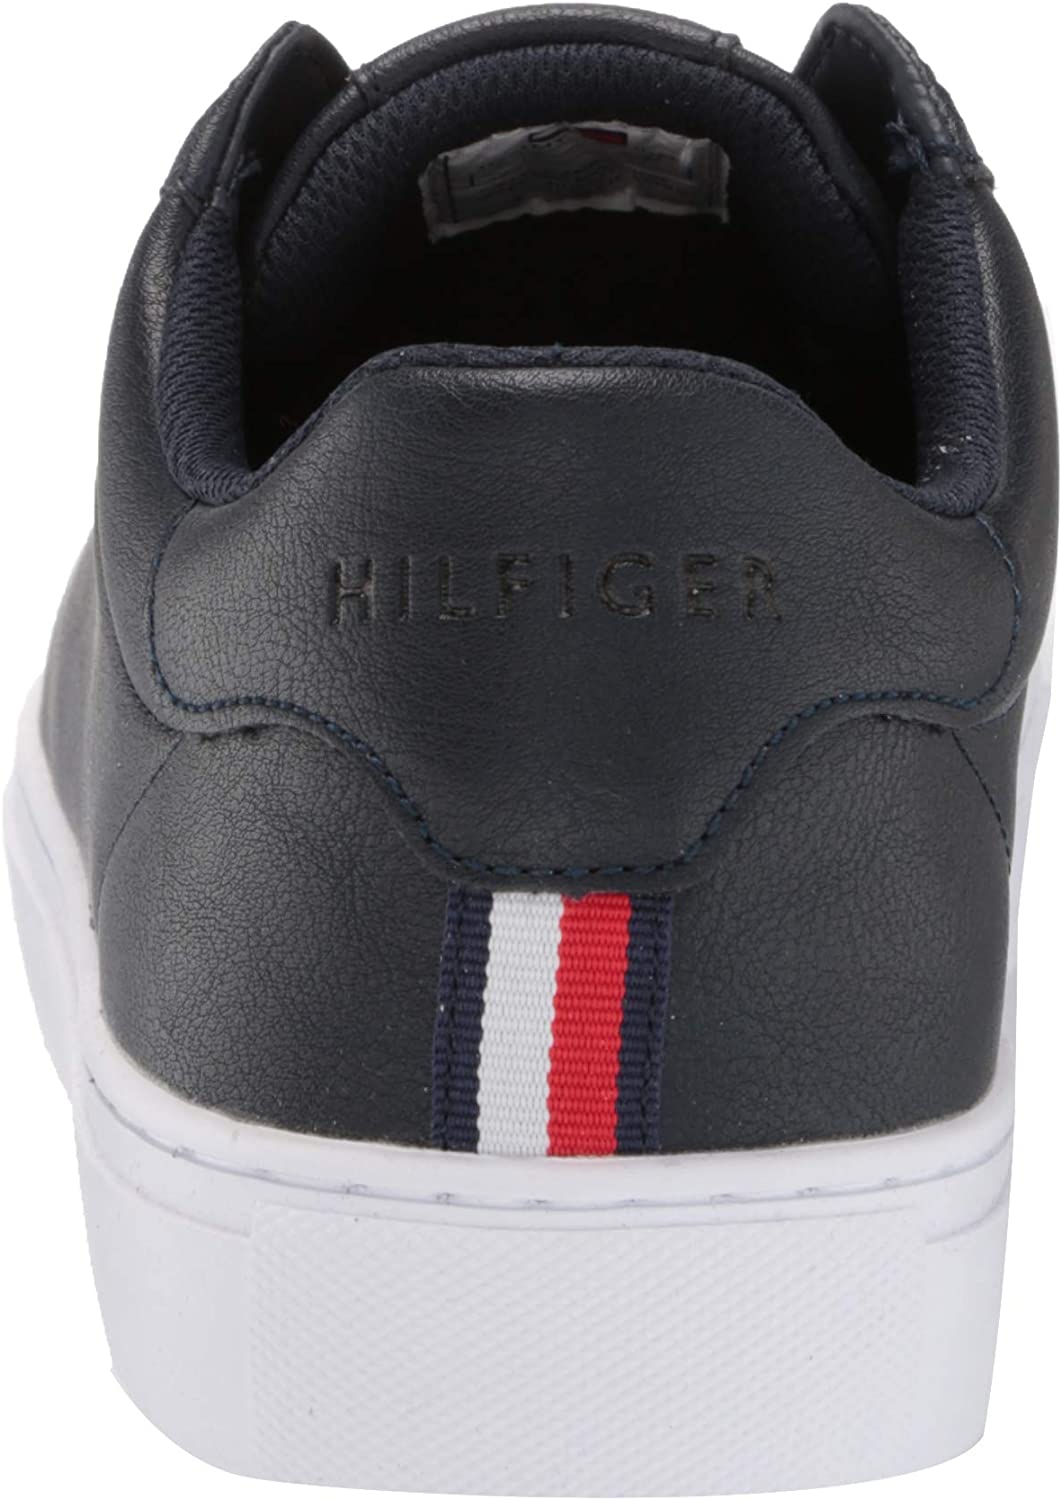 Tommy Hilfiger Men's BRECON Sneakers Shoes, Navy